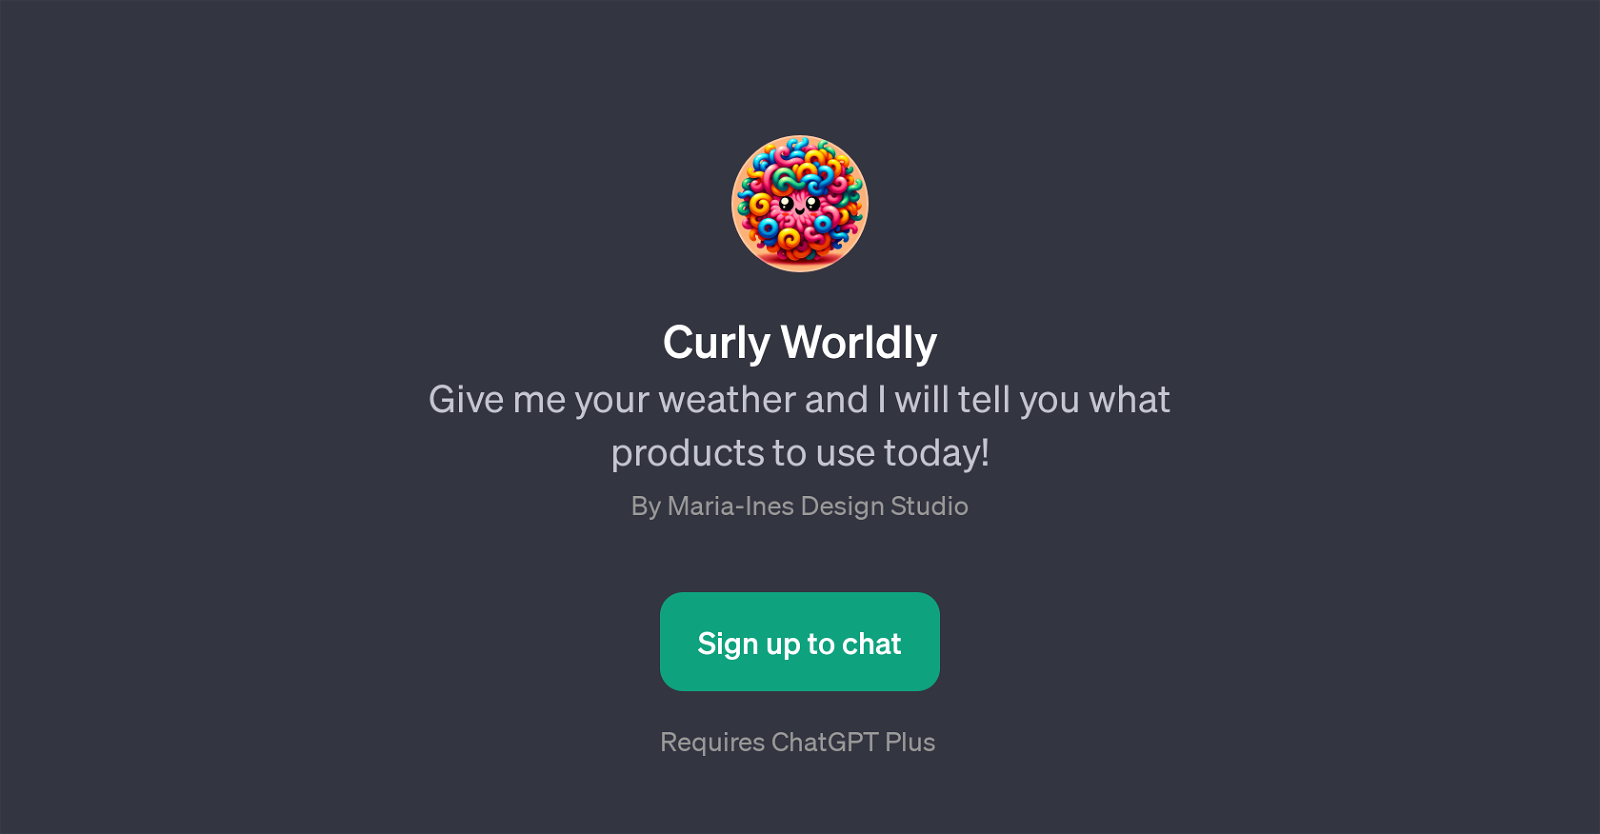 Curly Worldly website